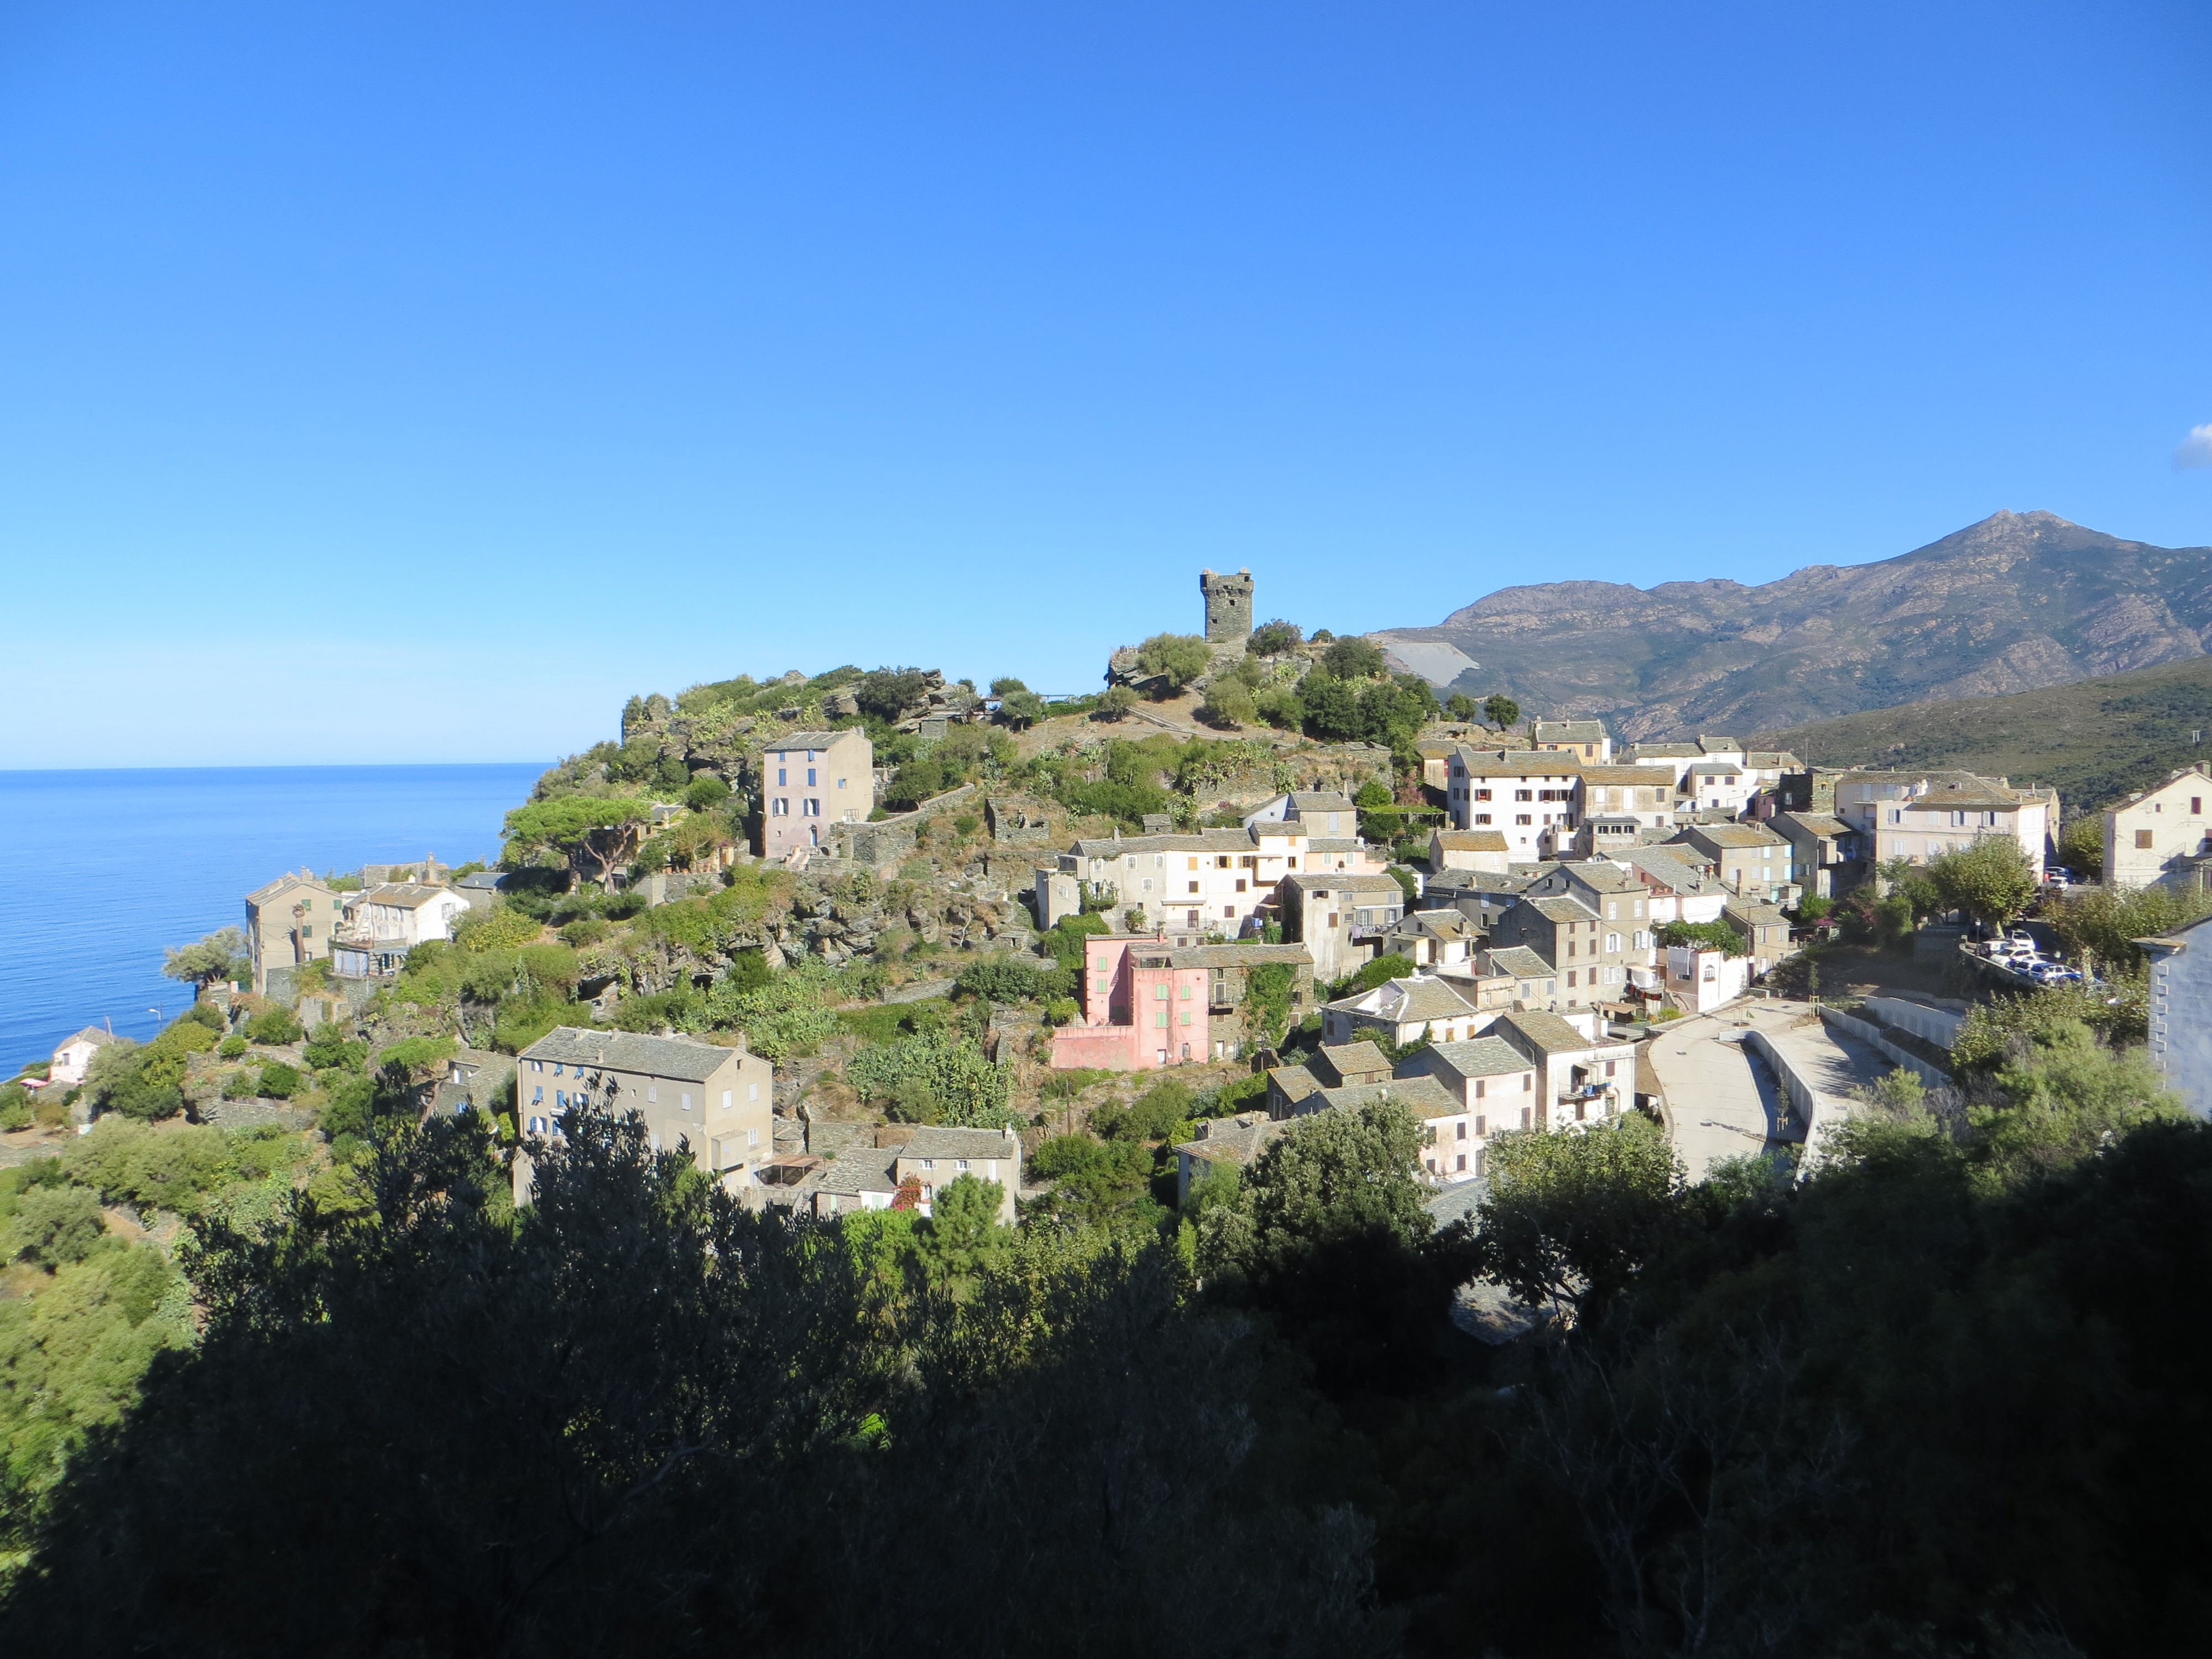 nonza-on-cap-corse-corsica-setting-for-the-house-at-zaronza